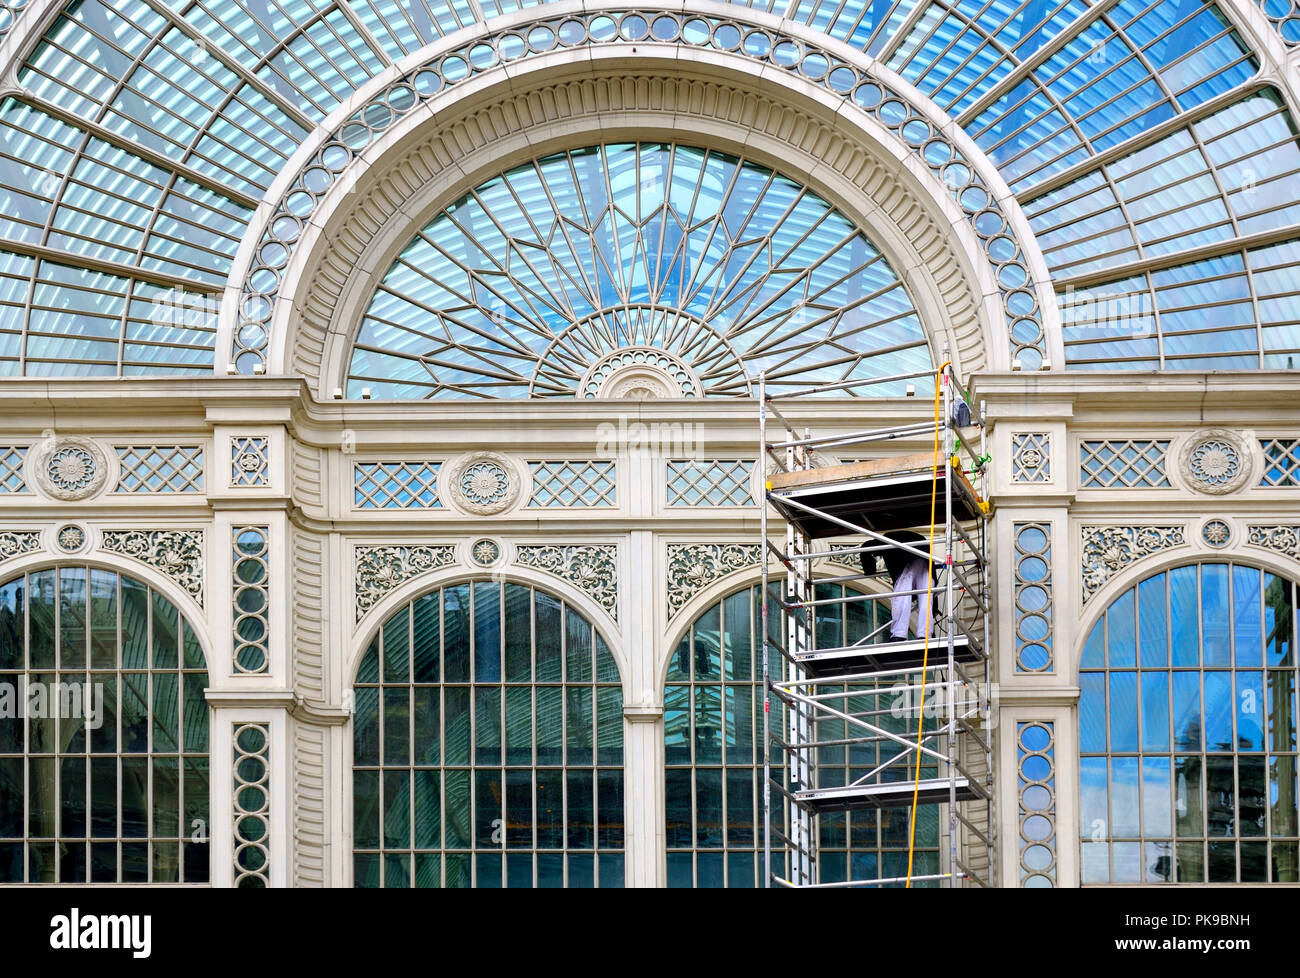 Restoration carried out on the Royal Opera House, Covent Garden, London, England, UK. Stock Photo